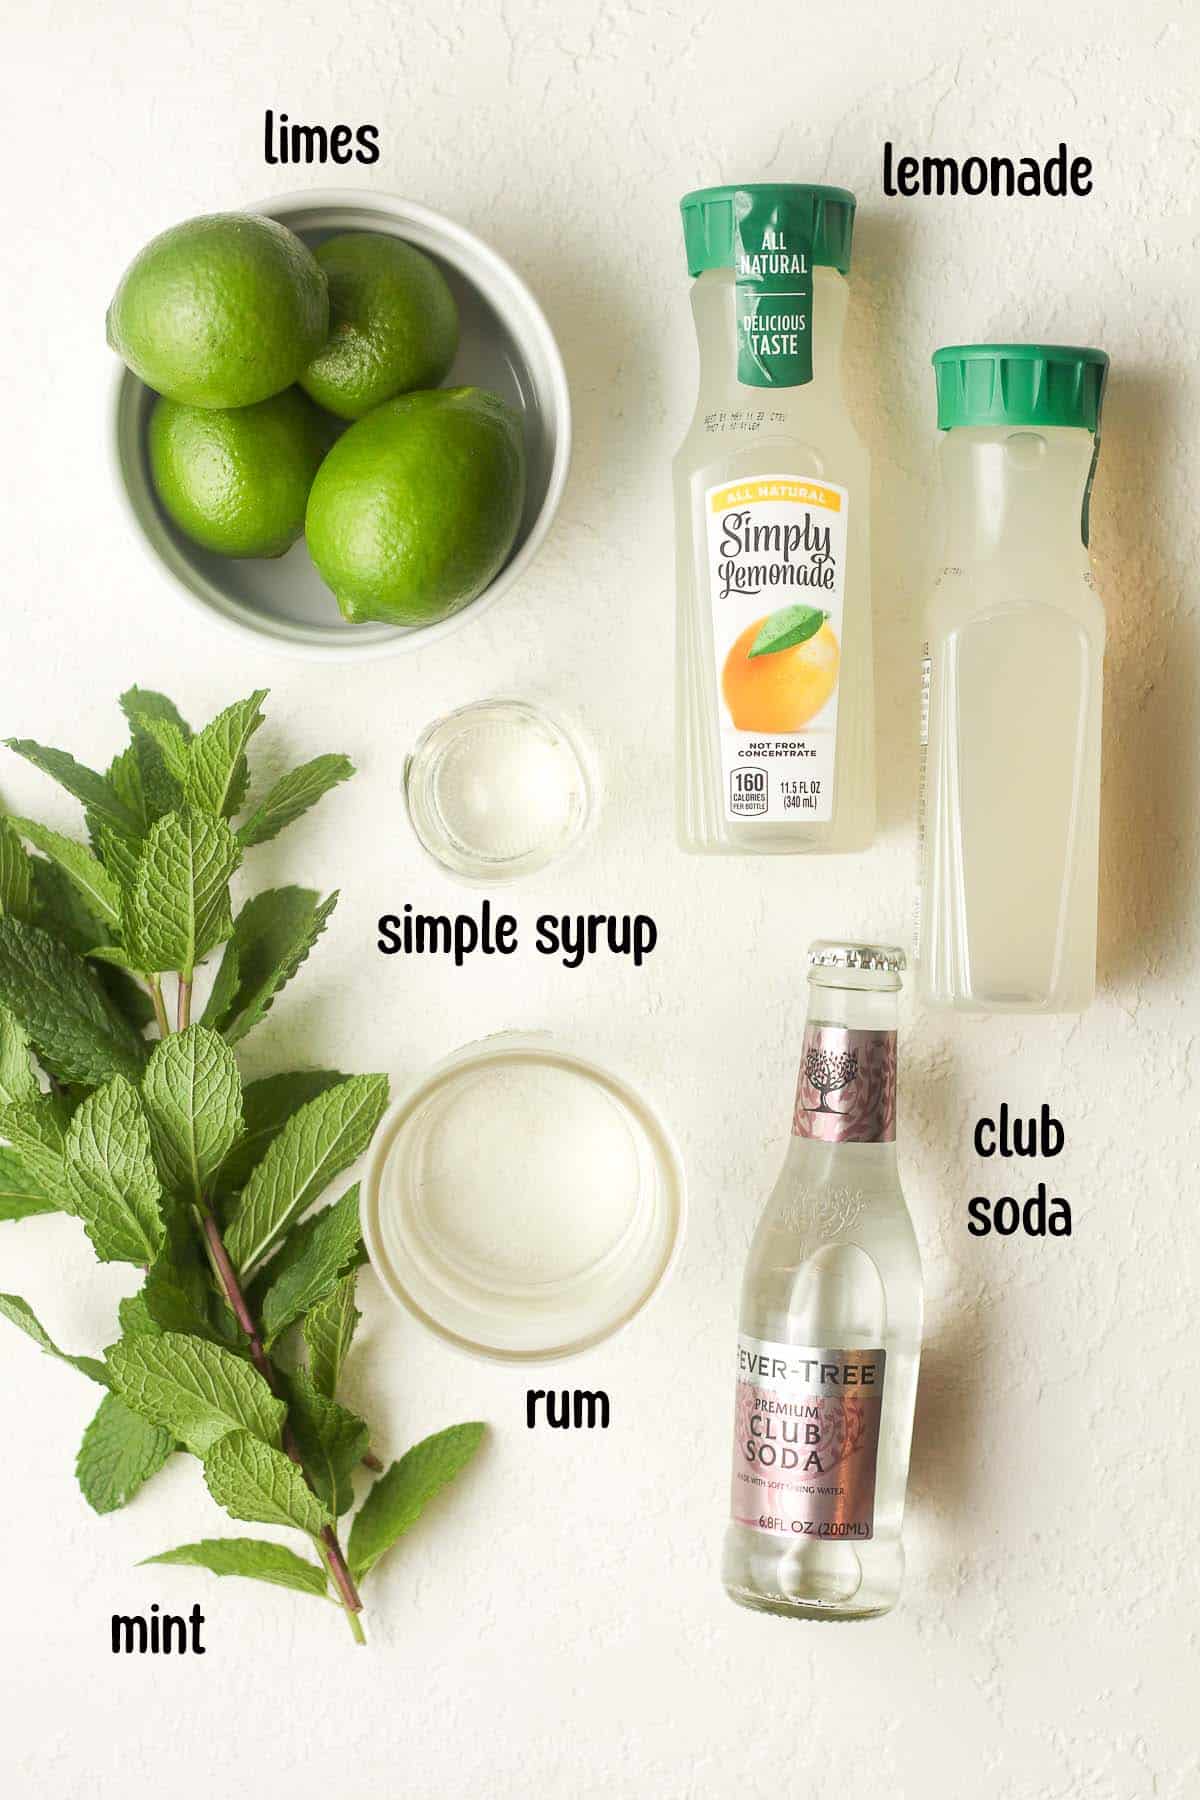 The mojitos ingredients, labeled.